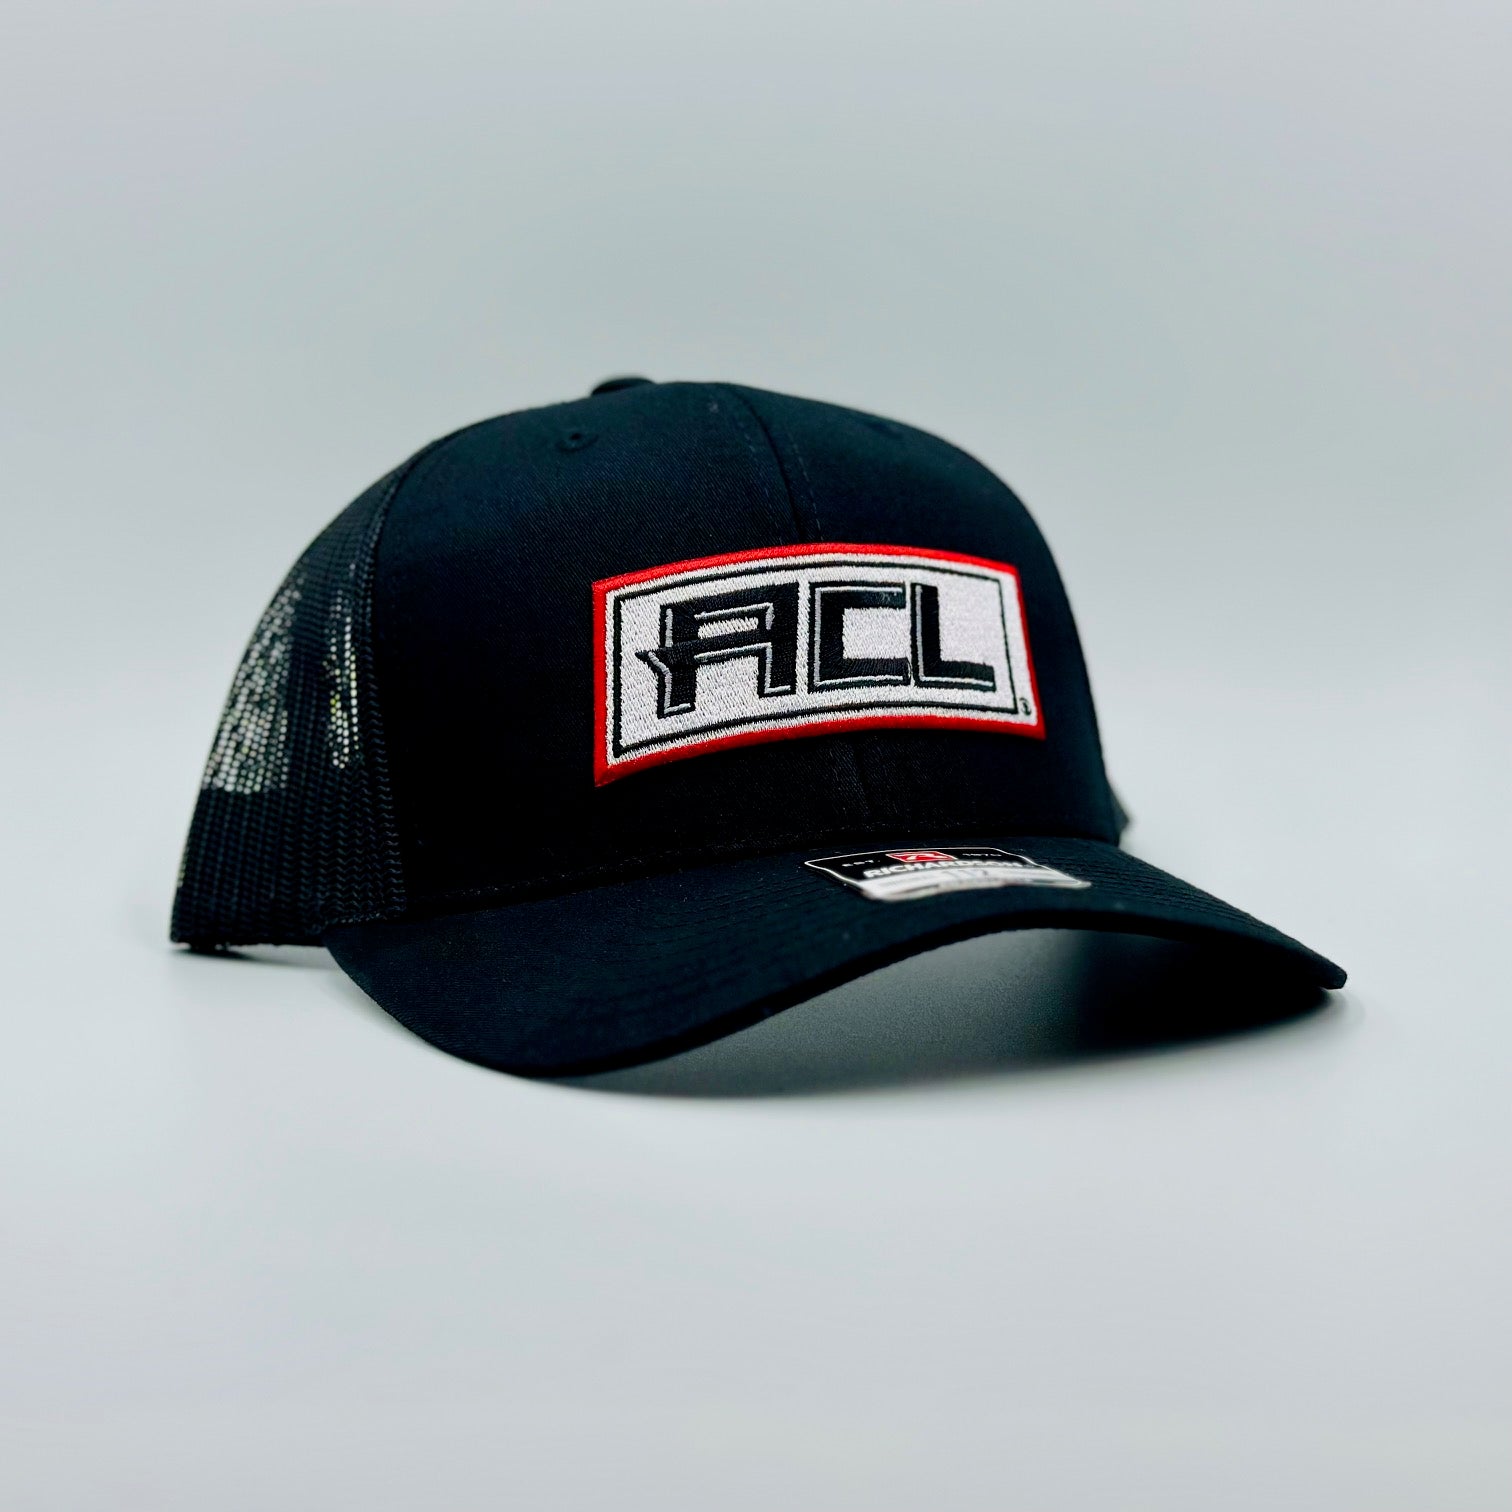 Black Hat With Stitched Patch